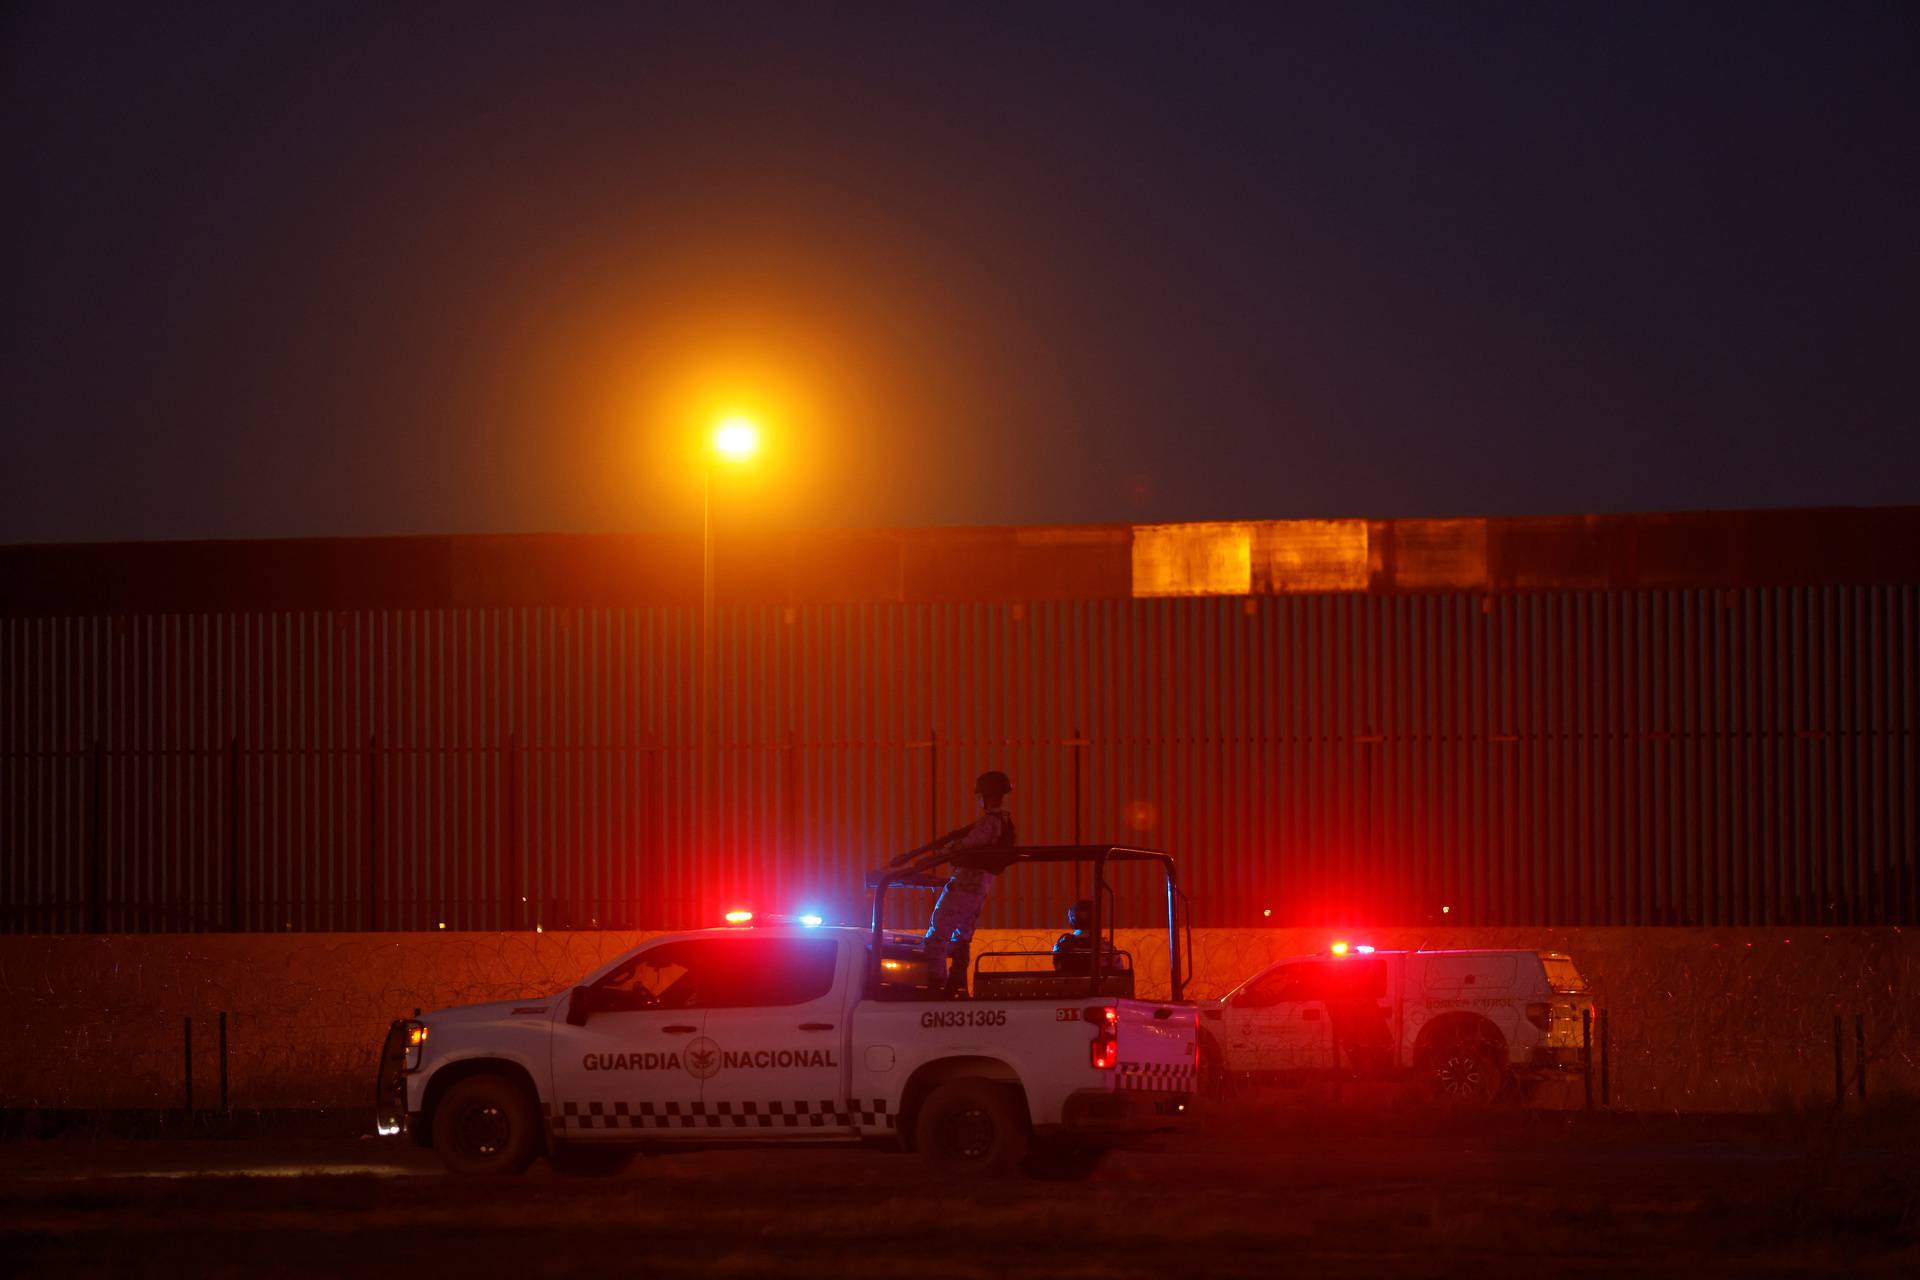 Members of the Mexican National Guard patrol near the US-Mexico border in Ciudad Juarez